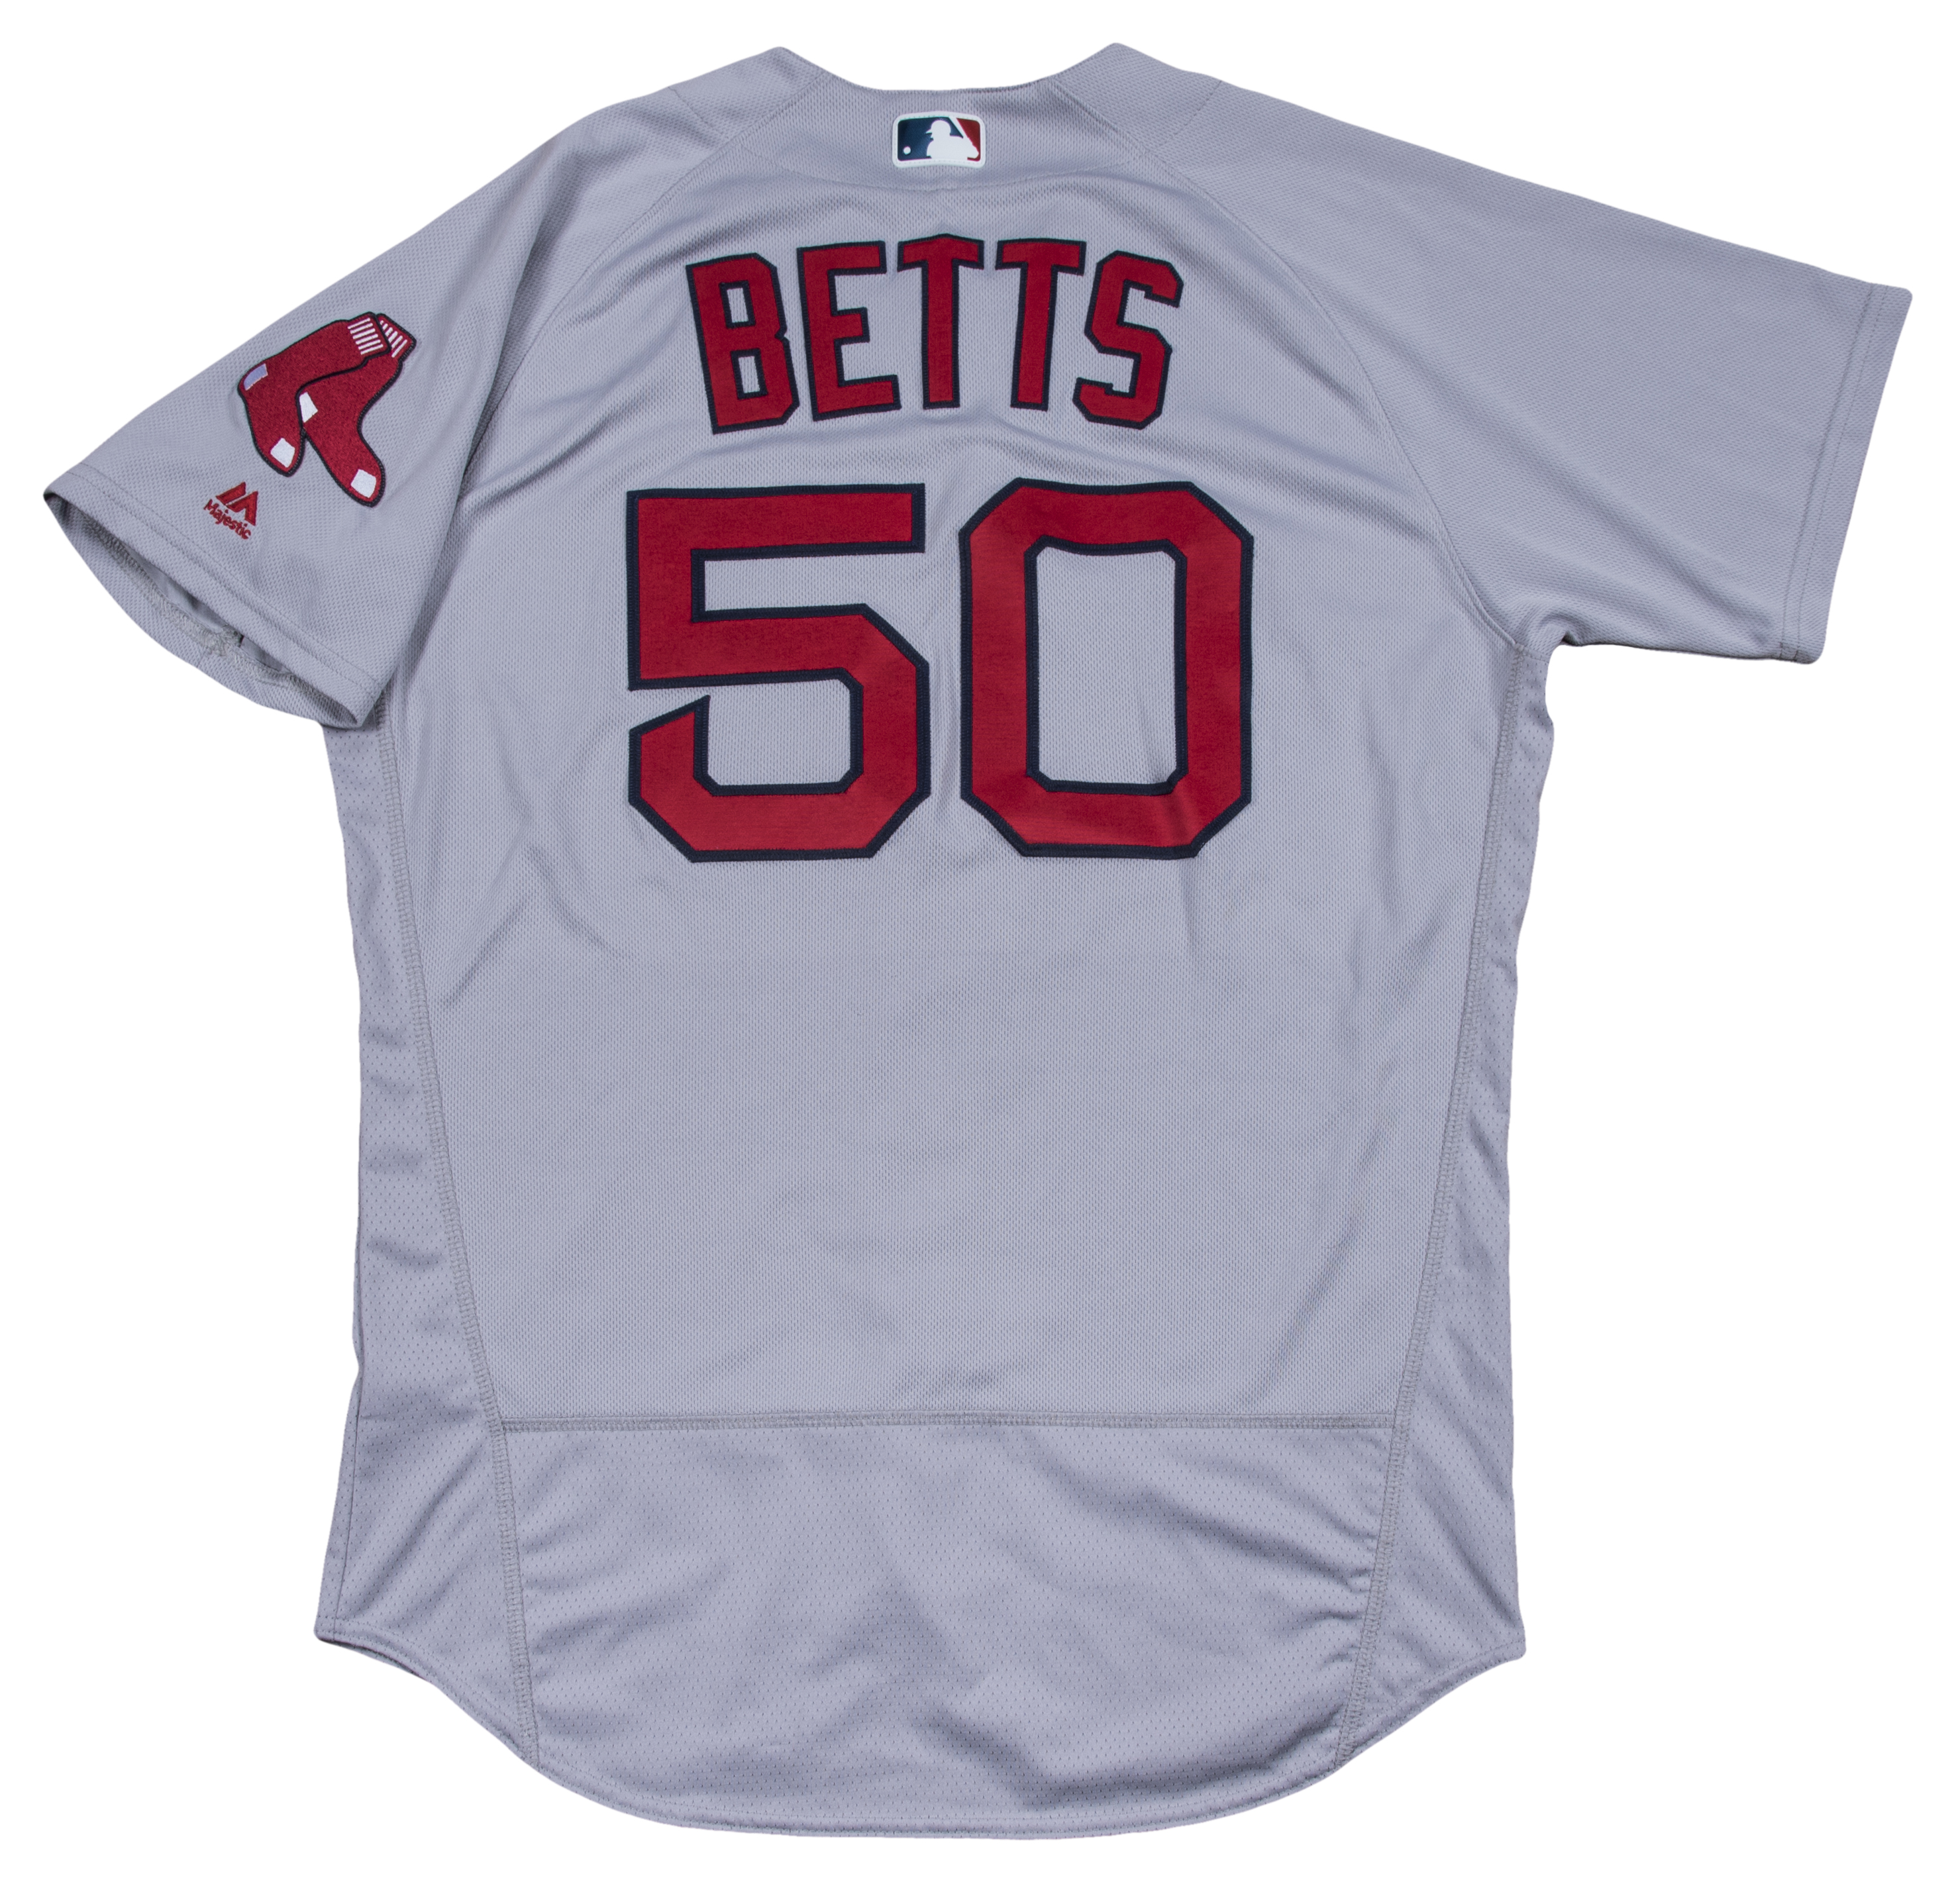 red sox away jersey 2016